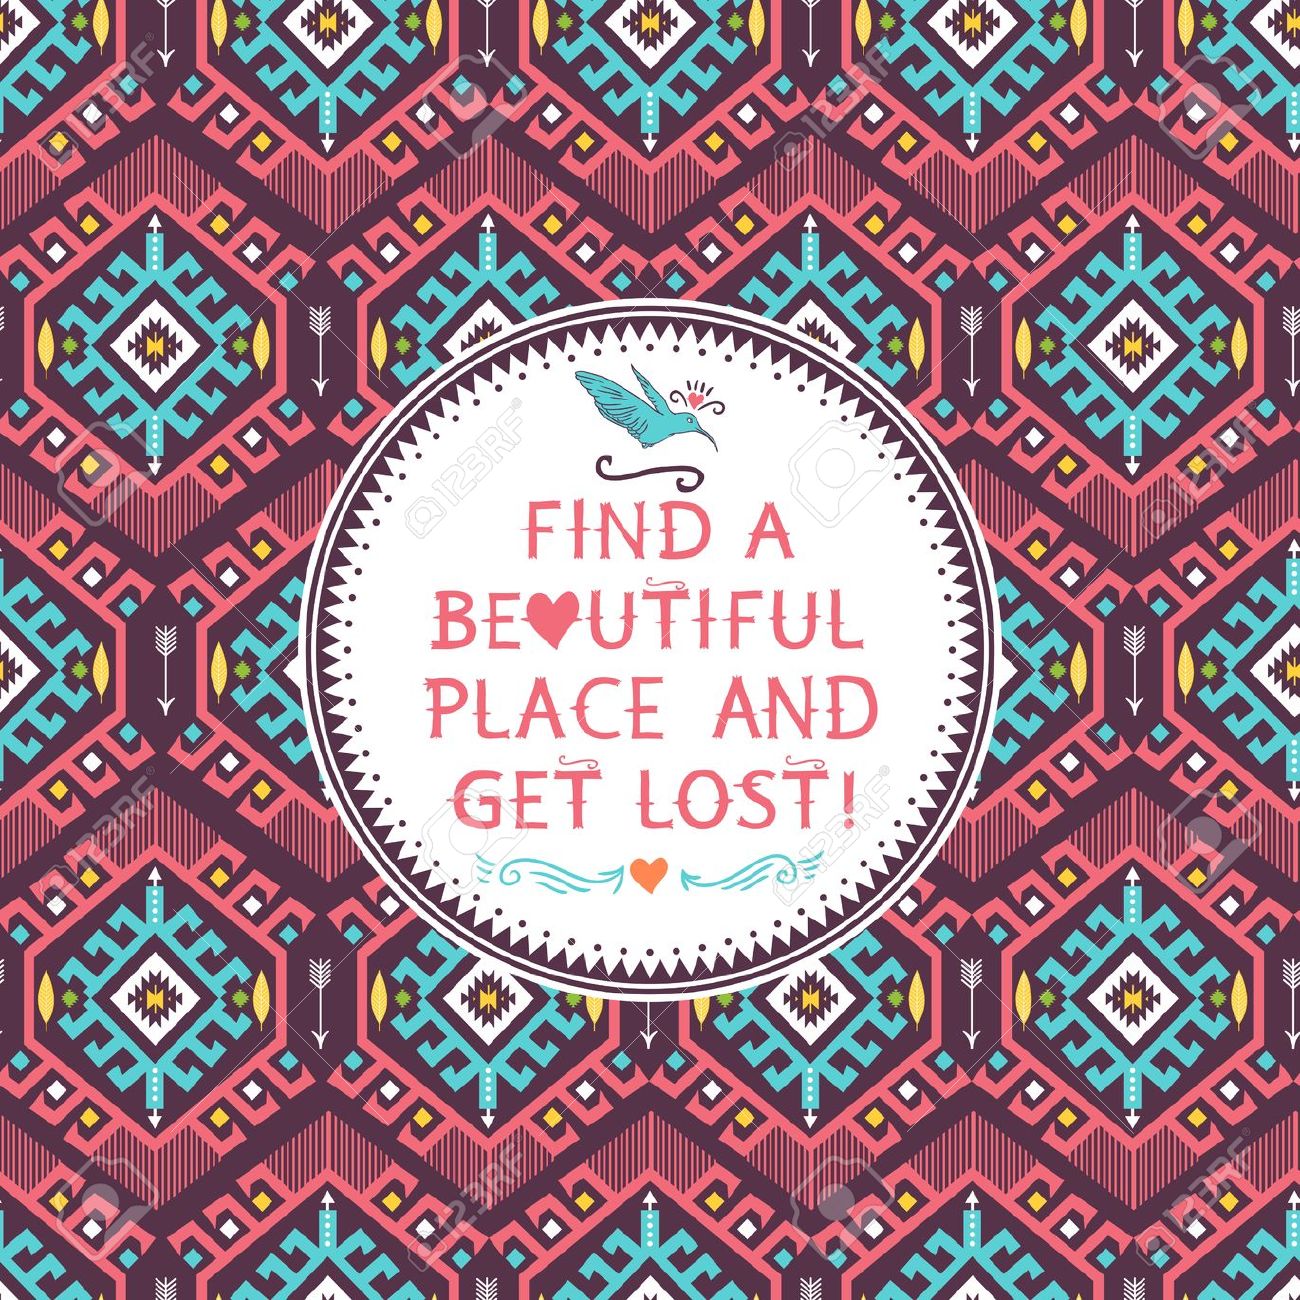 24084209-Hipster-seamless-colorful-tribal-pattern-with-geometric-elements-and-quotes-typographic-text-Stock-Vector